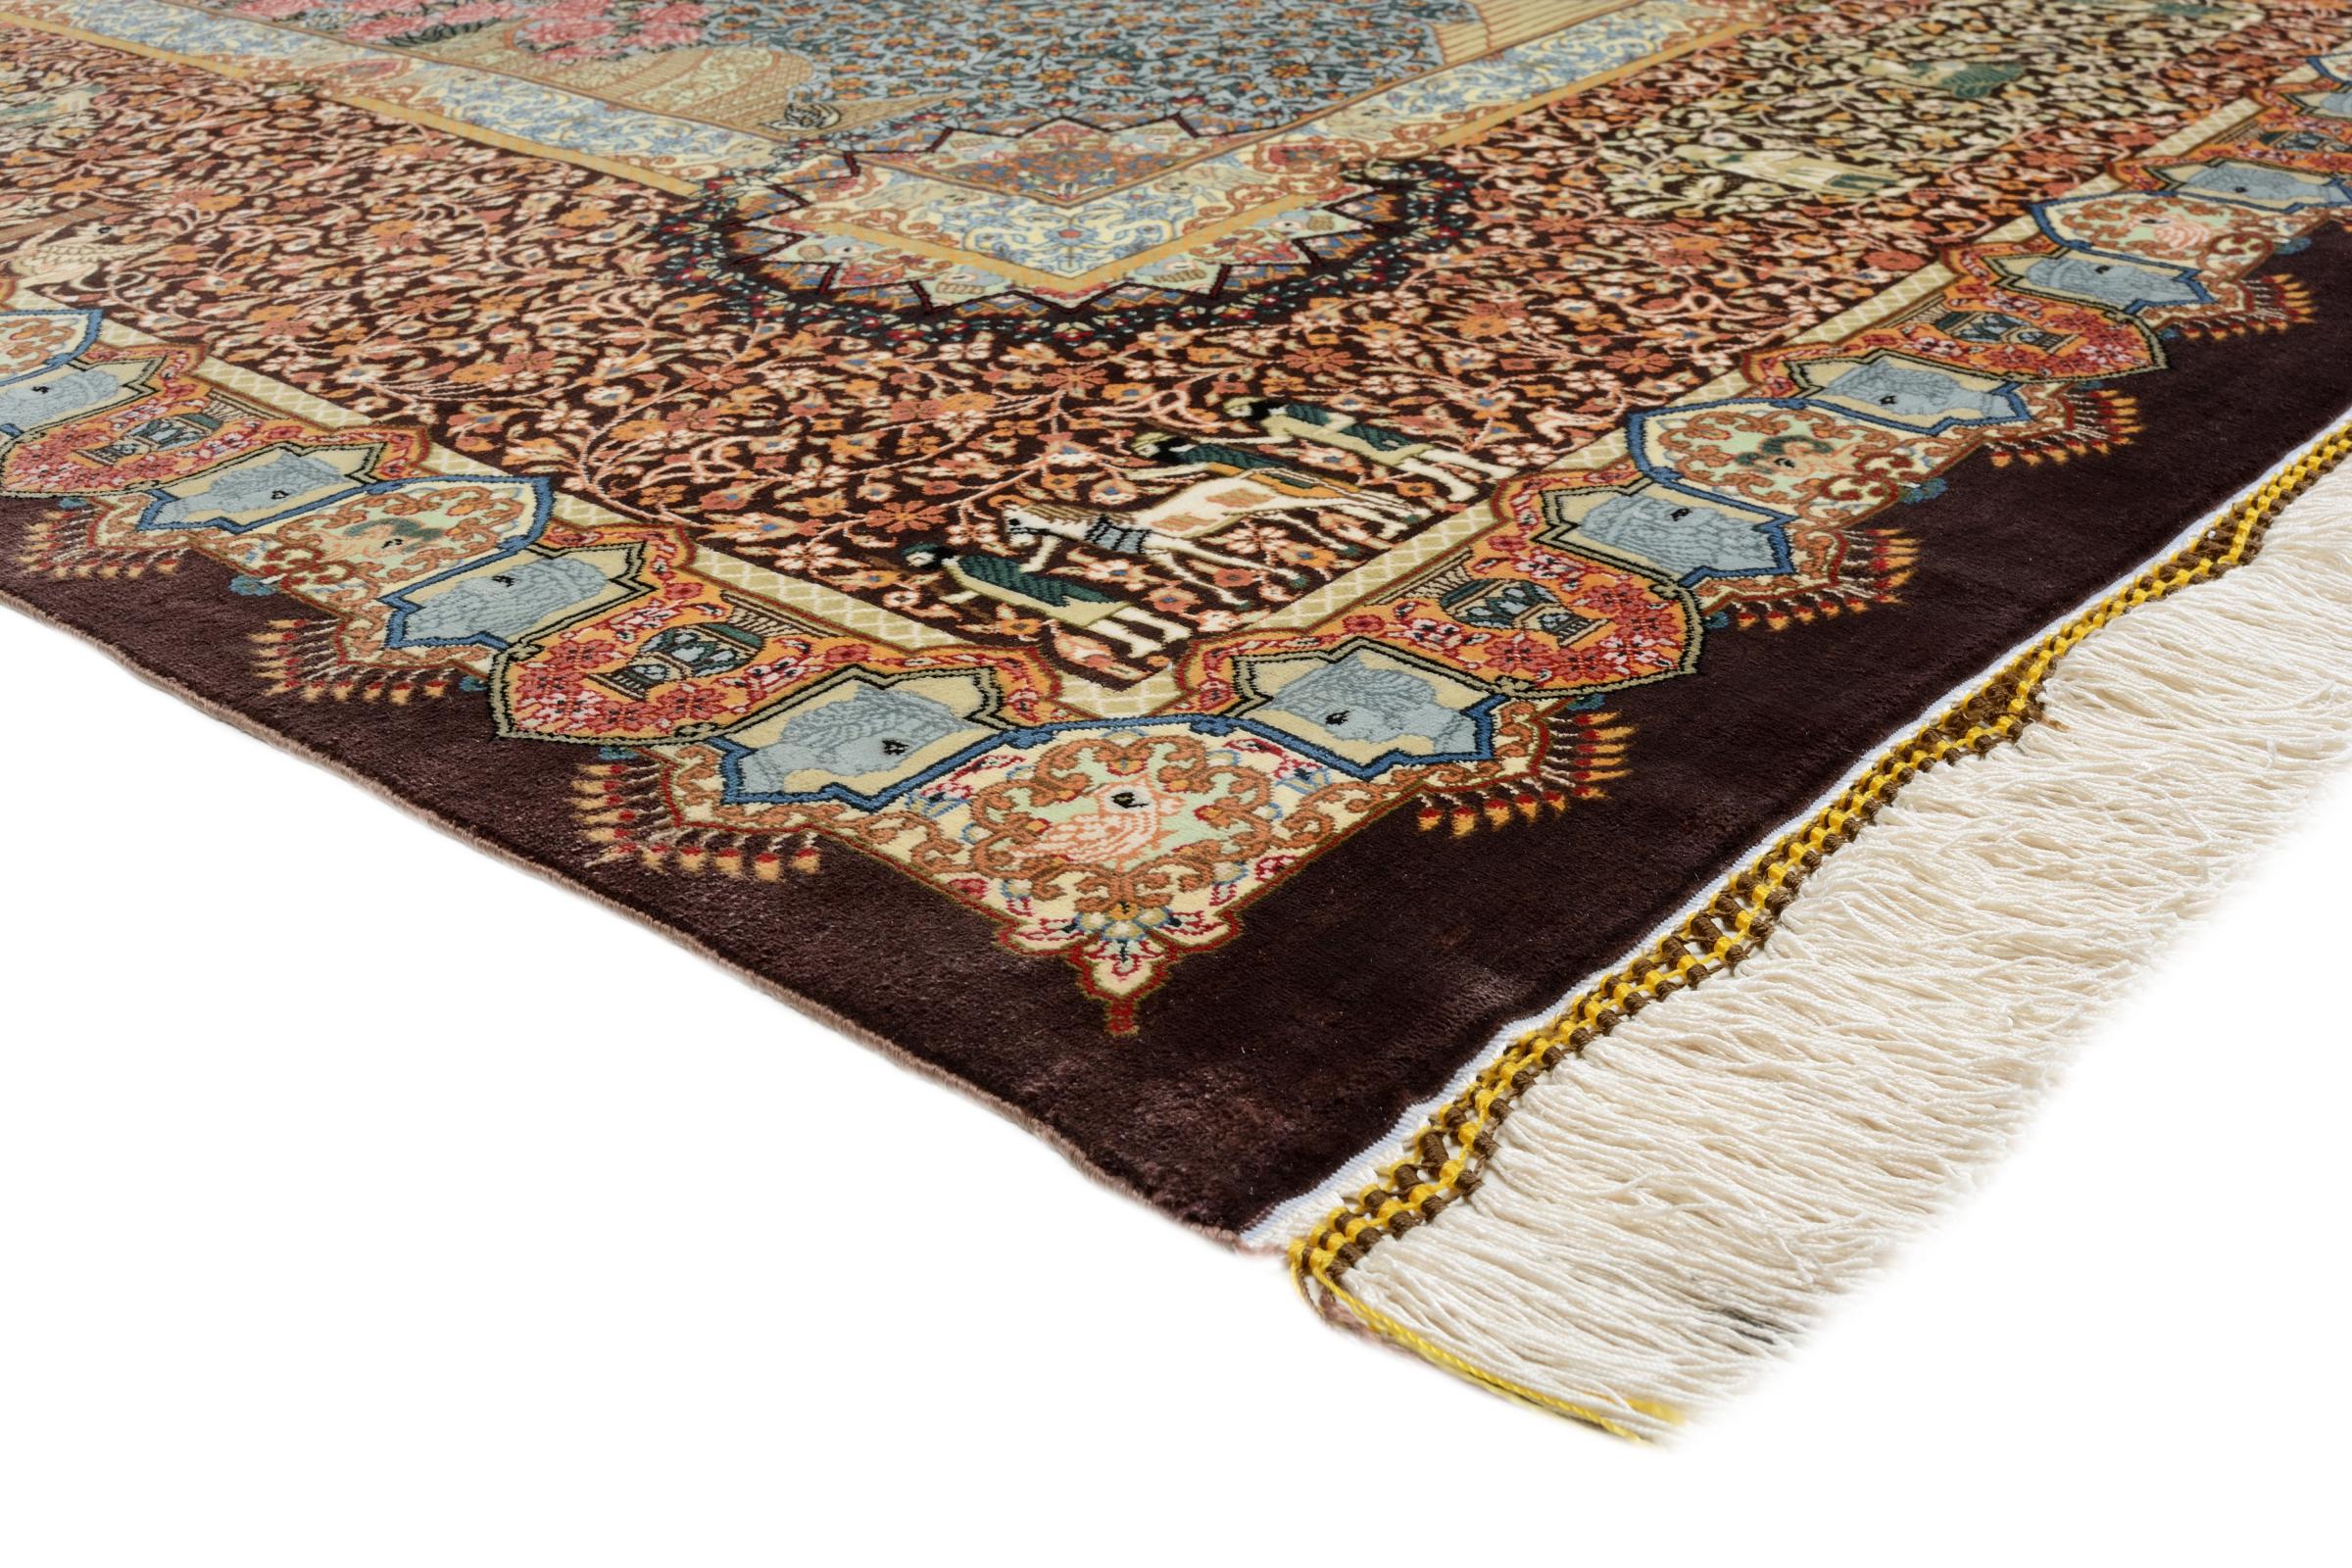 How to identify Oriental & Persian rugs